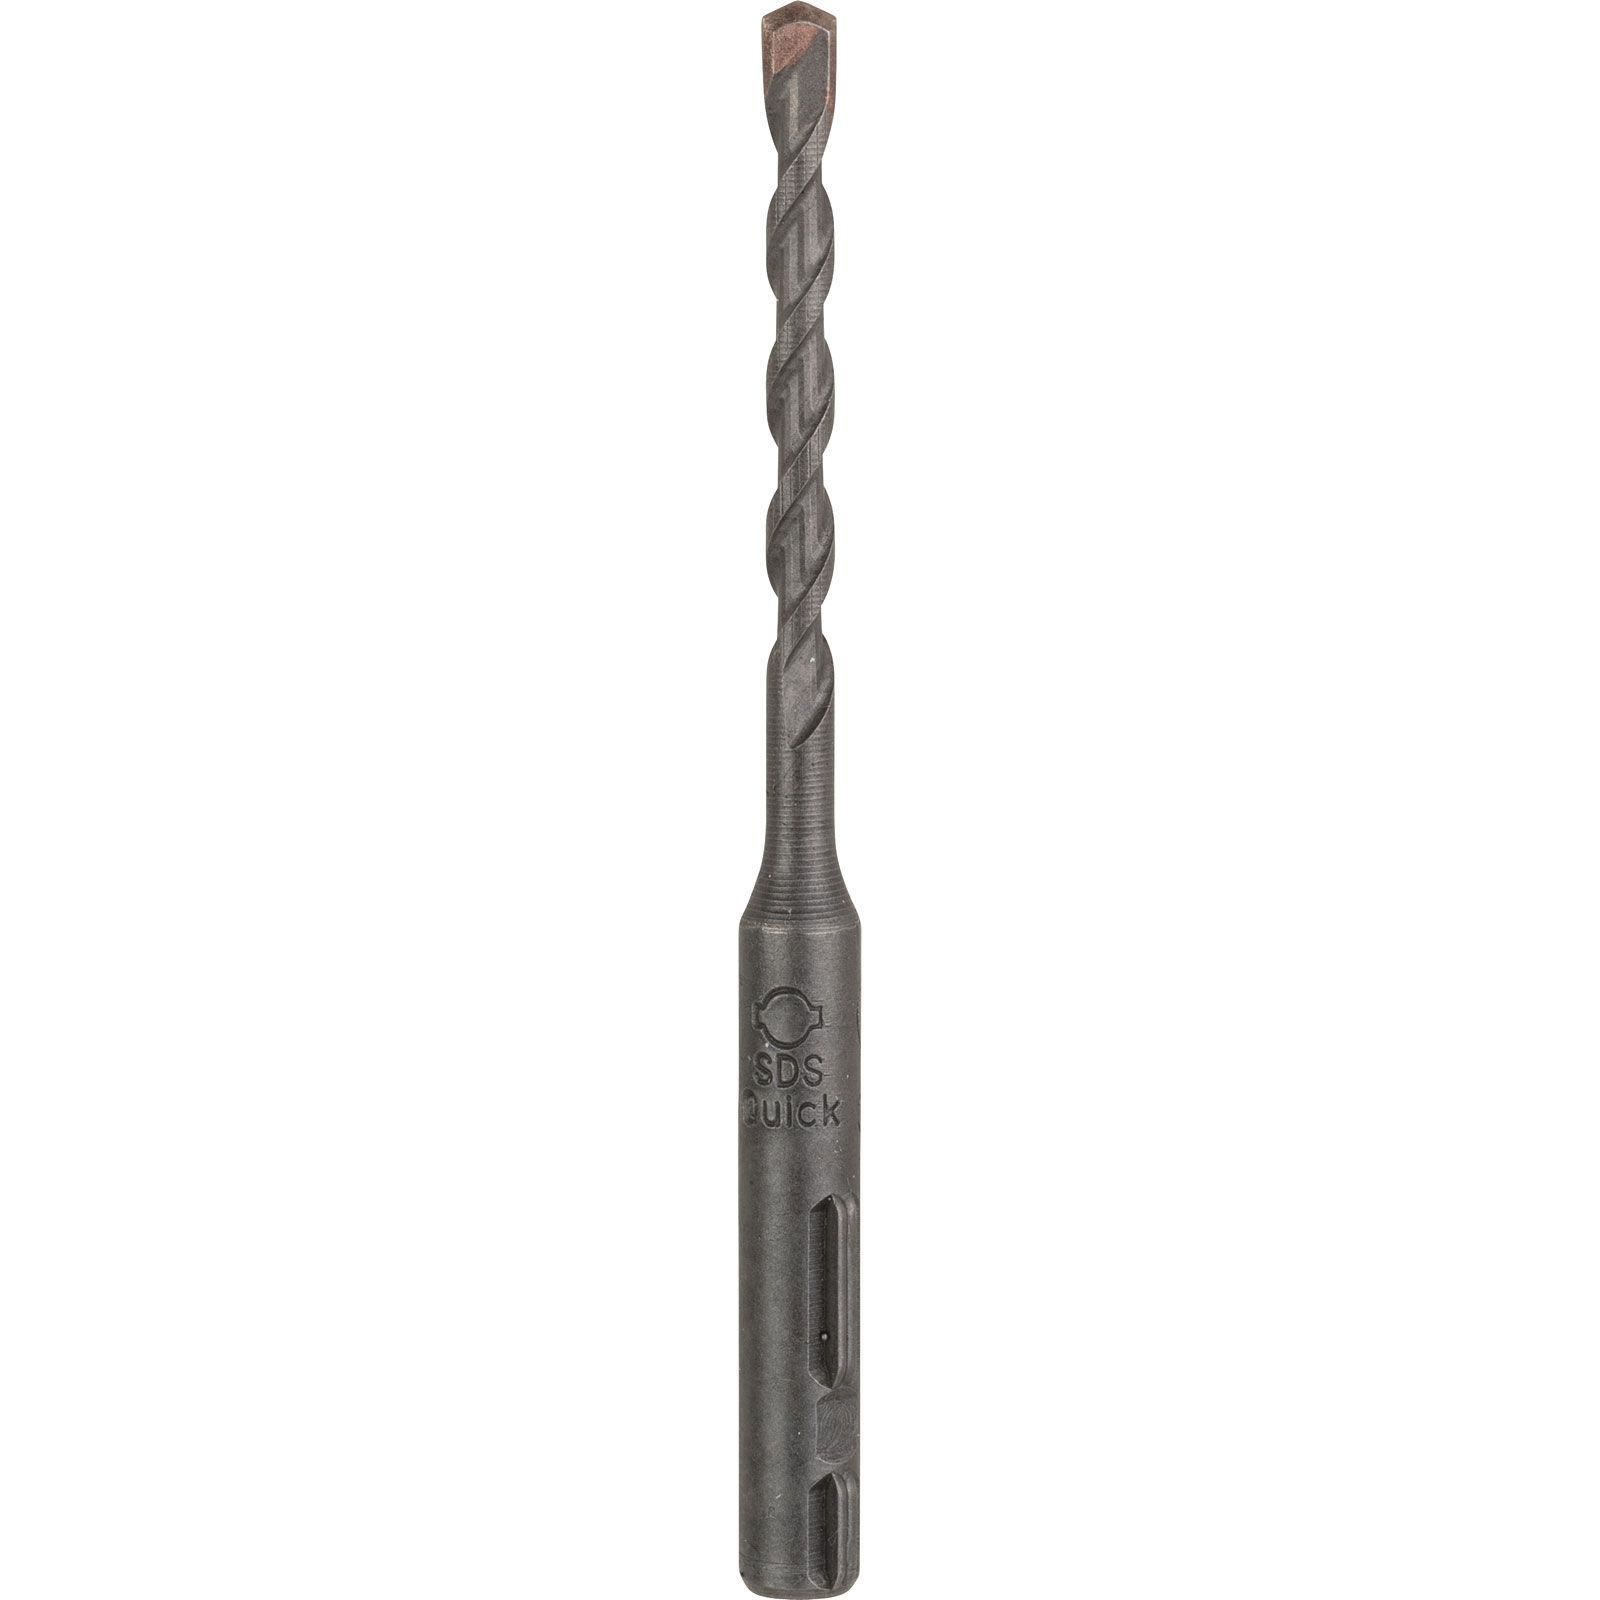 Photo of Bosch Uneo Sds Quick Masonary Drill Bit 4mm 85mm Pack Of 1